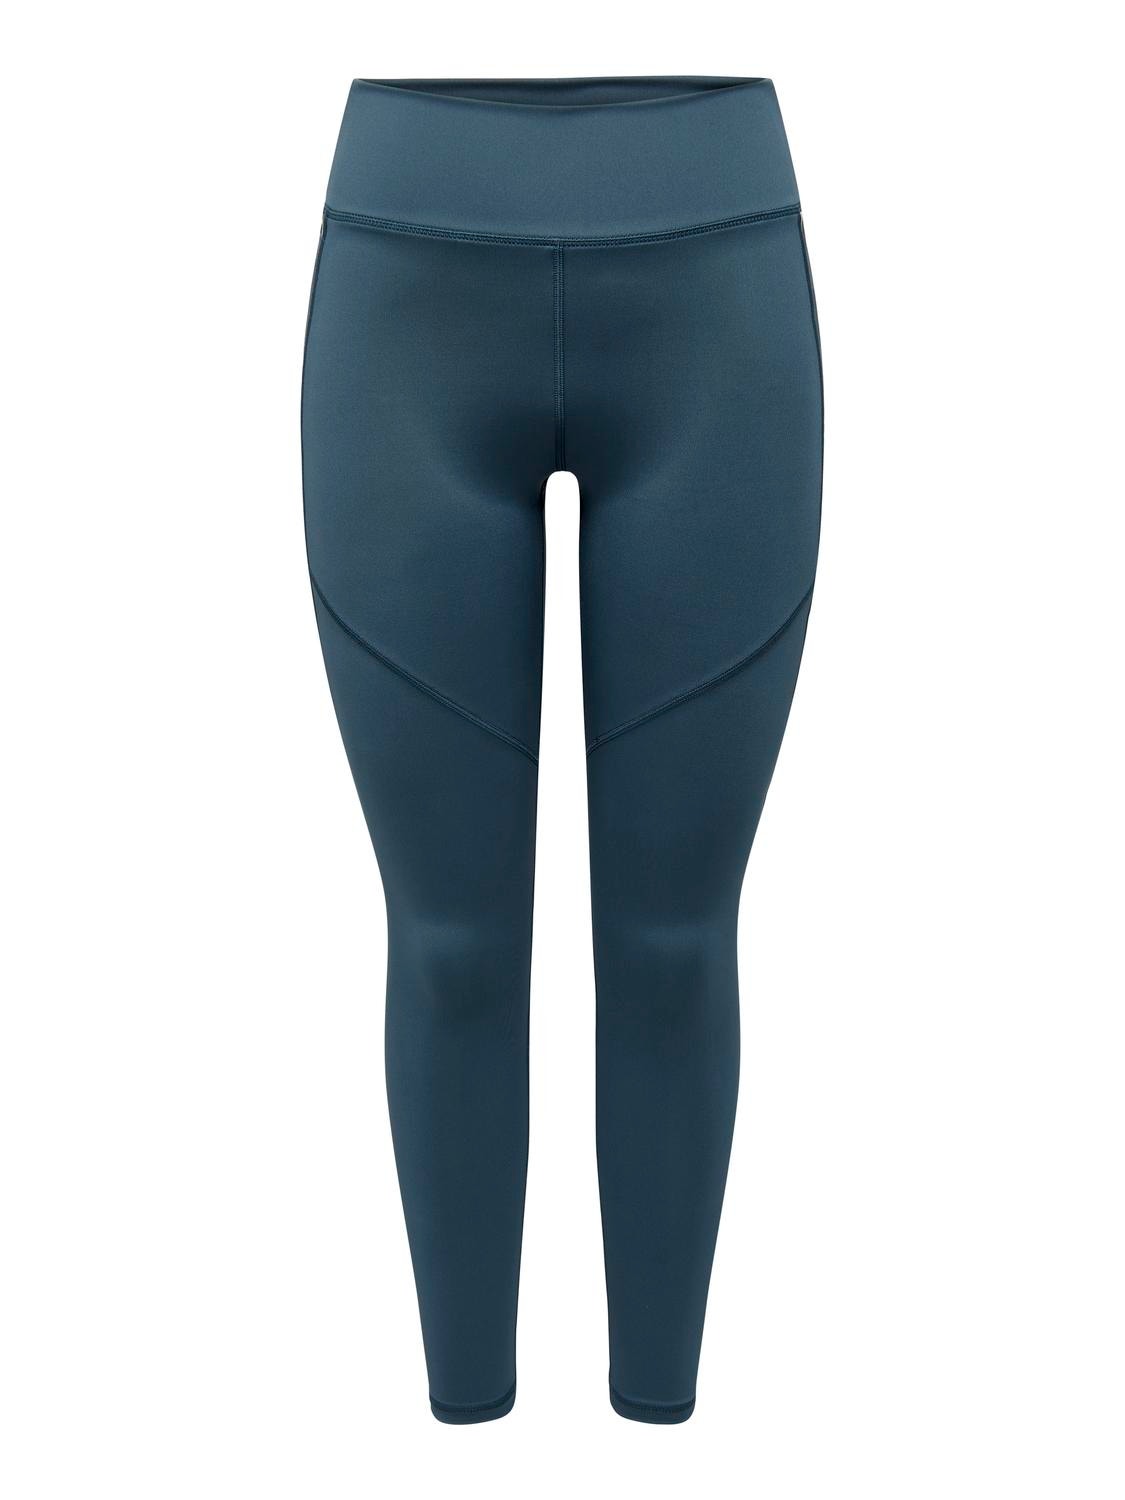 ONLY Tight fit High waist Legging -Orion Blue - 15294994